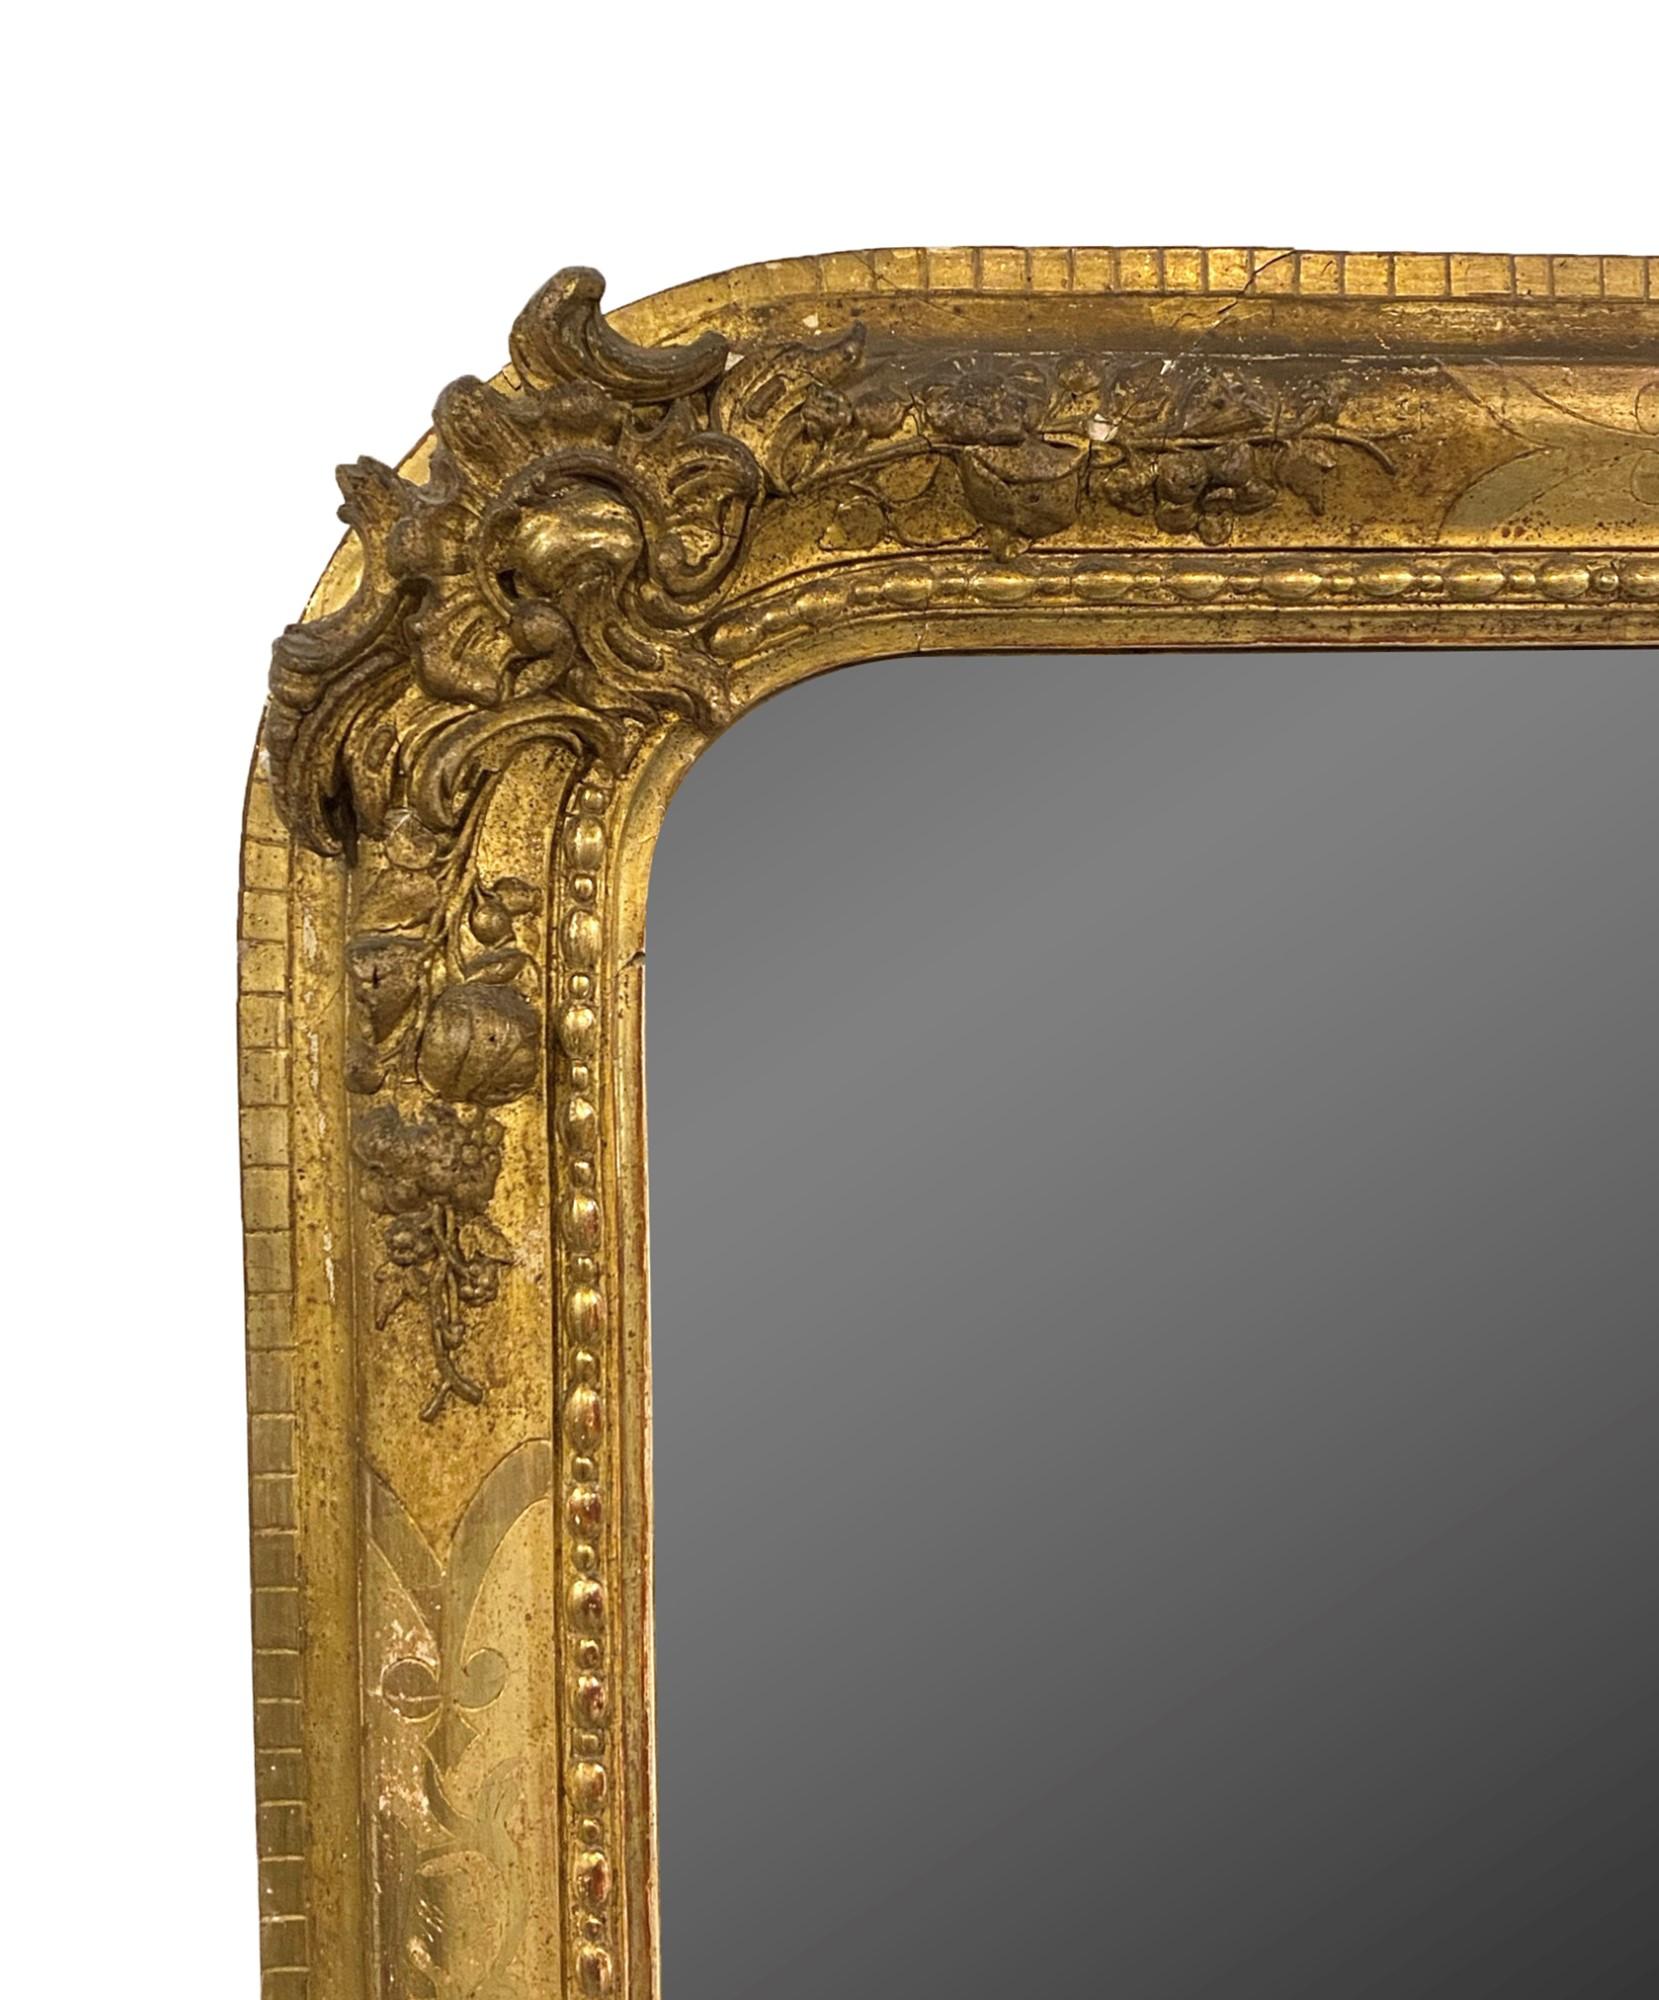 Hand carved wood and gesso framed mirror with floral designs and the original patina from the early 1900s. Original gilt finish with only minor losses to the frame. This was imported from Europe. This can be seen at our 333 West 52nd St location in